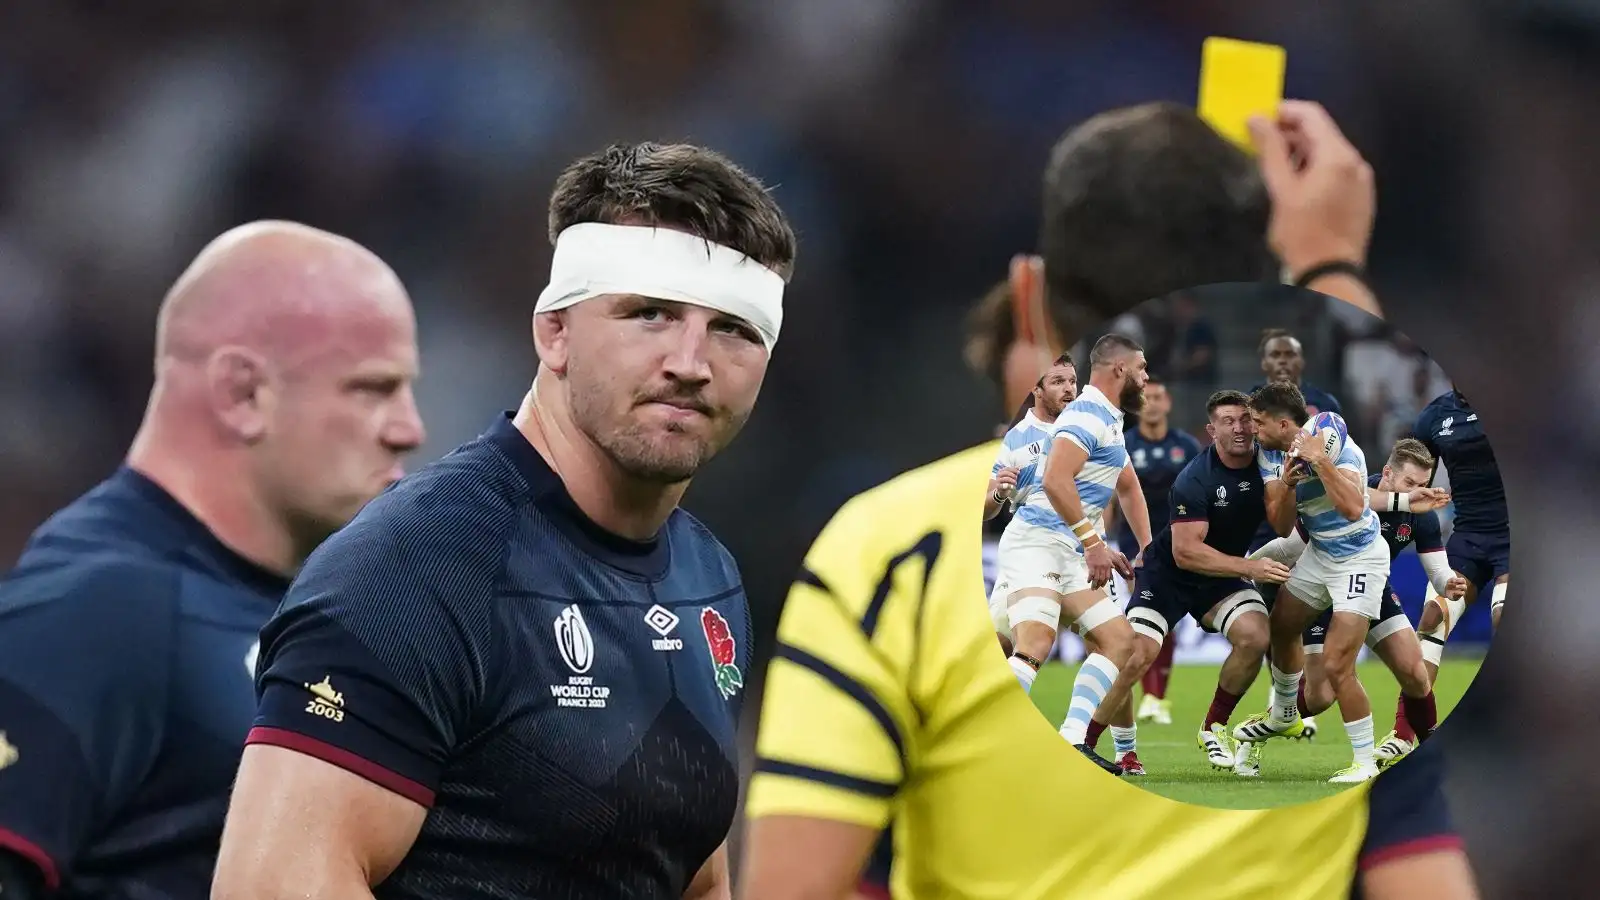 England's Tom Curry is shown a yellow card during the 2023 Rugby World Cup Pool D match at the Stade de Marseille, France. Picture date: Saturday September 9, 2023.